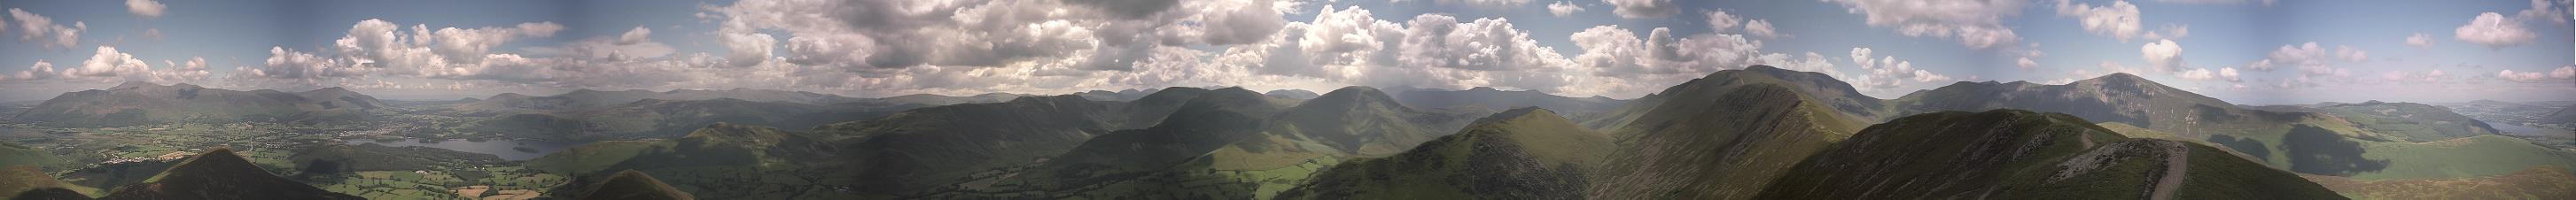 Causey Pike - Complete Panorama